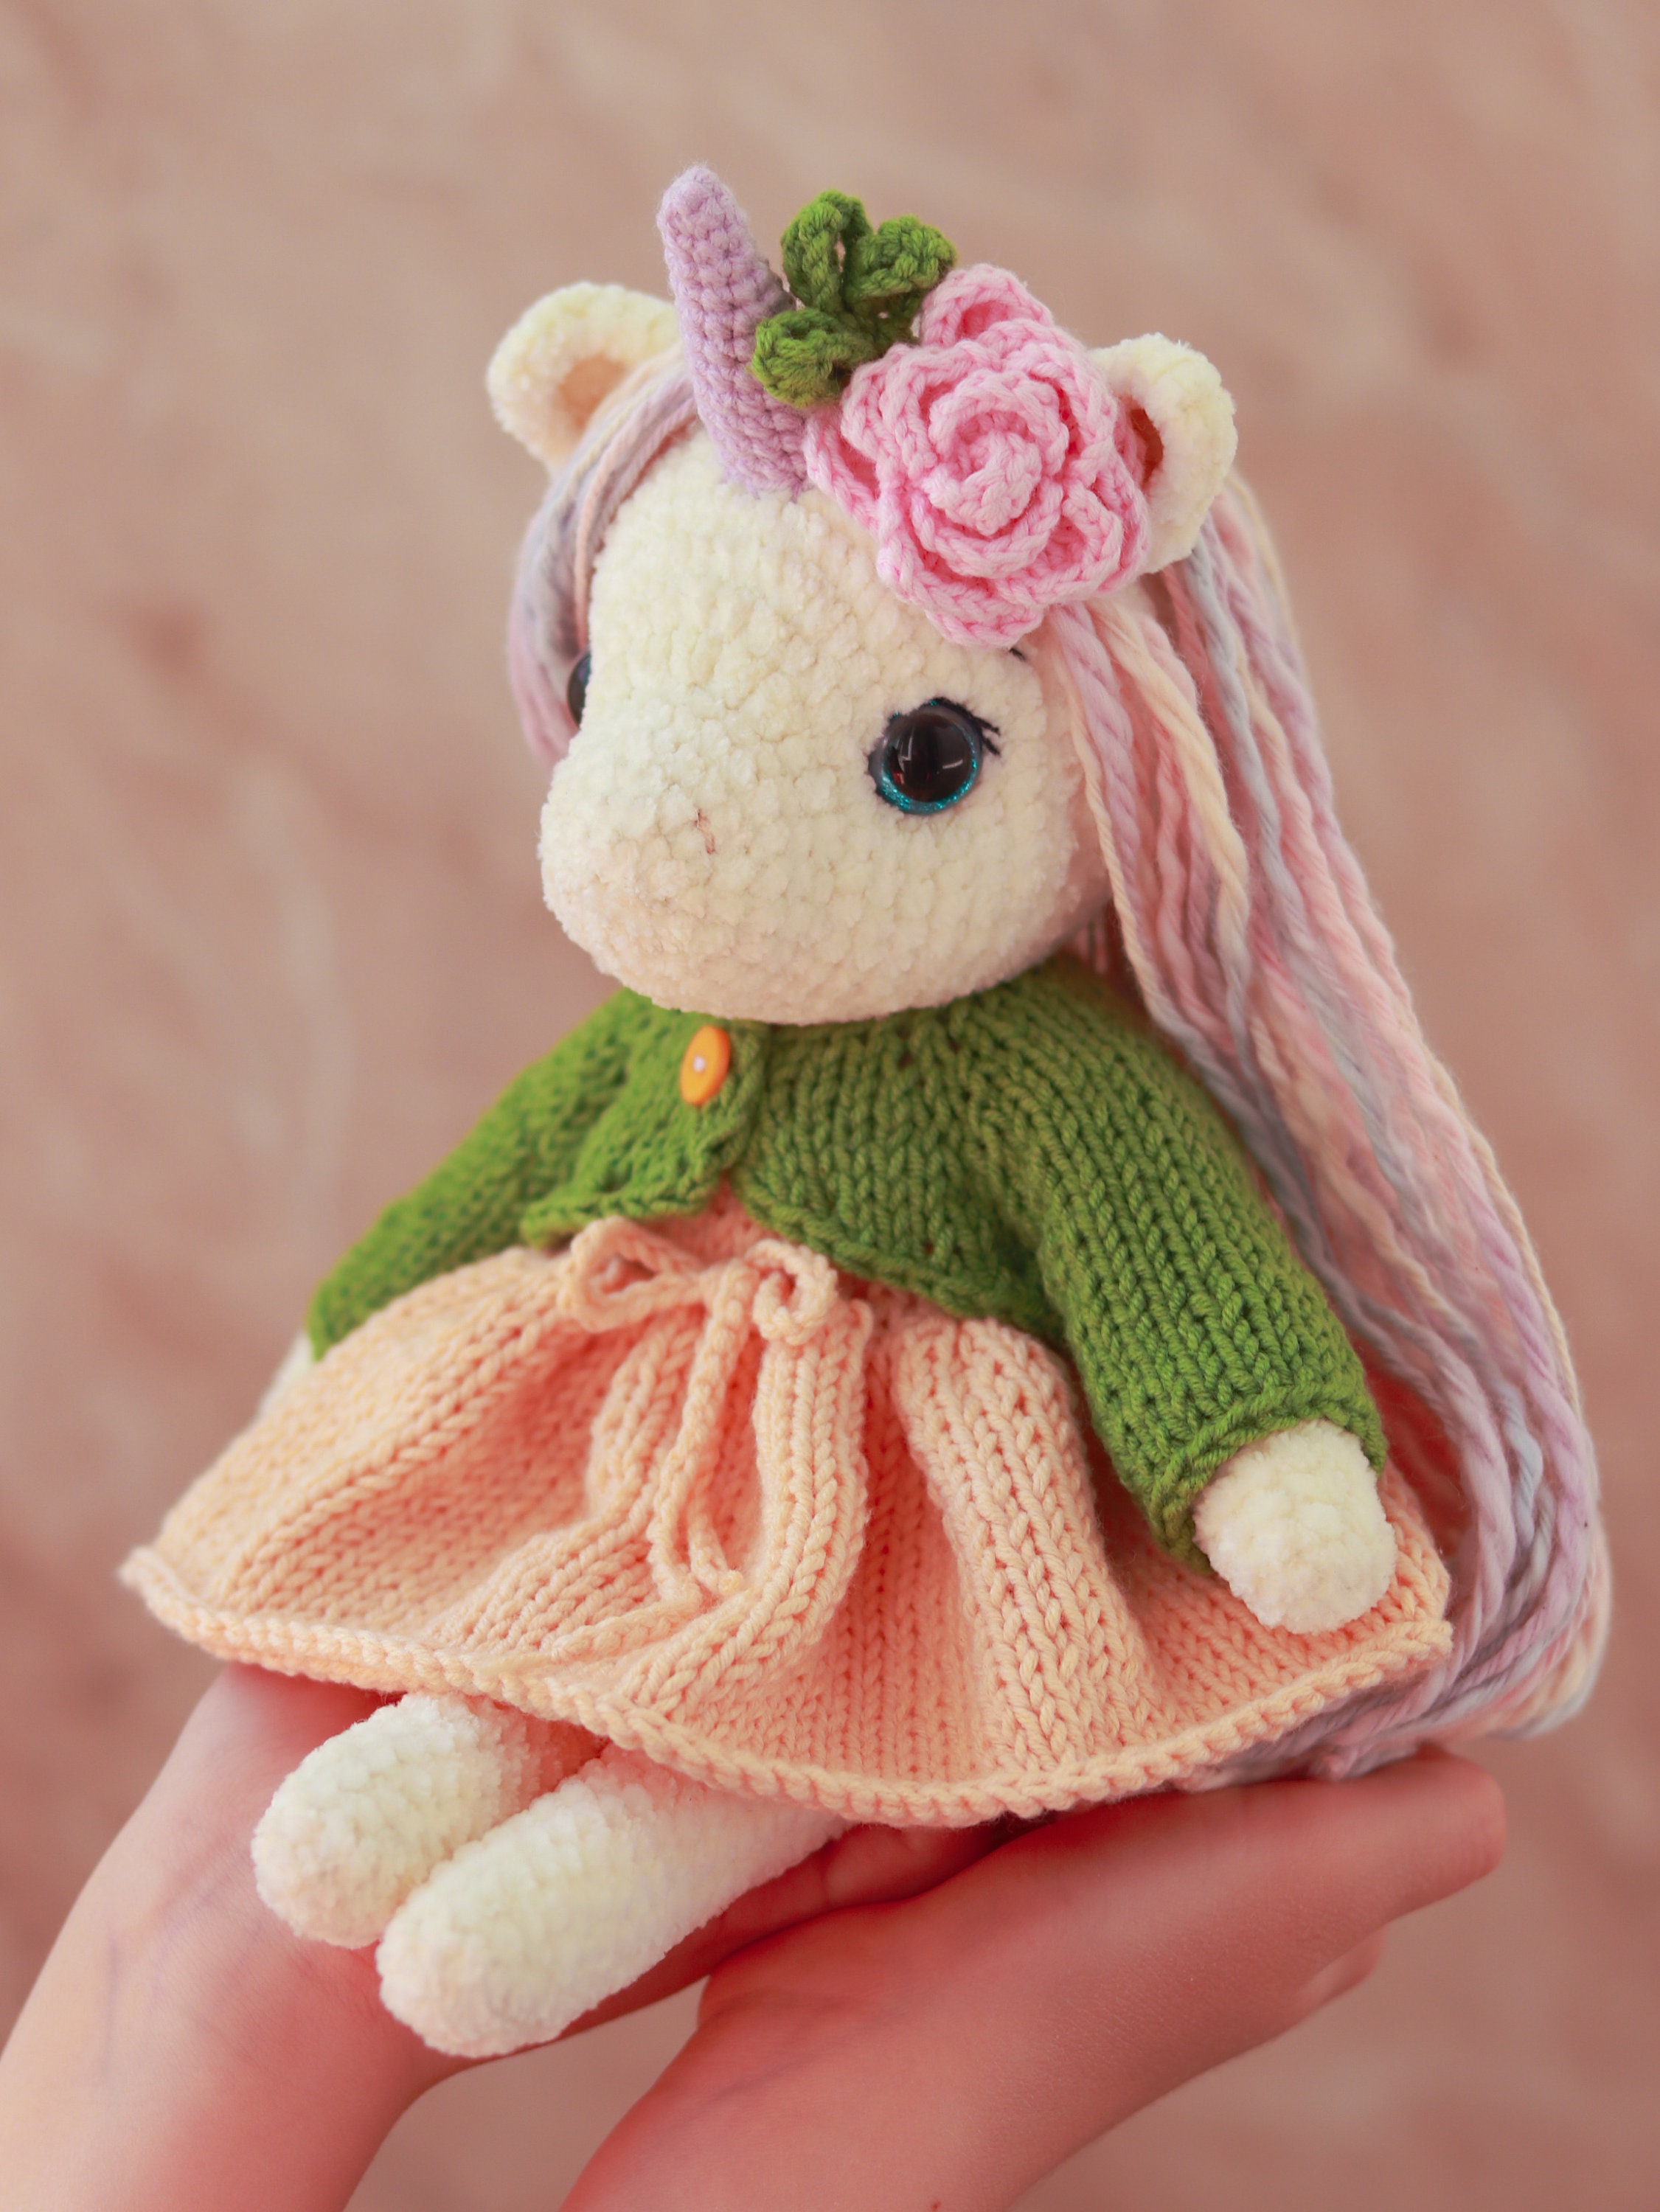 How To Make Crochet A Plush Unicorn Toy Online